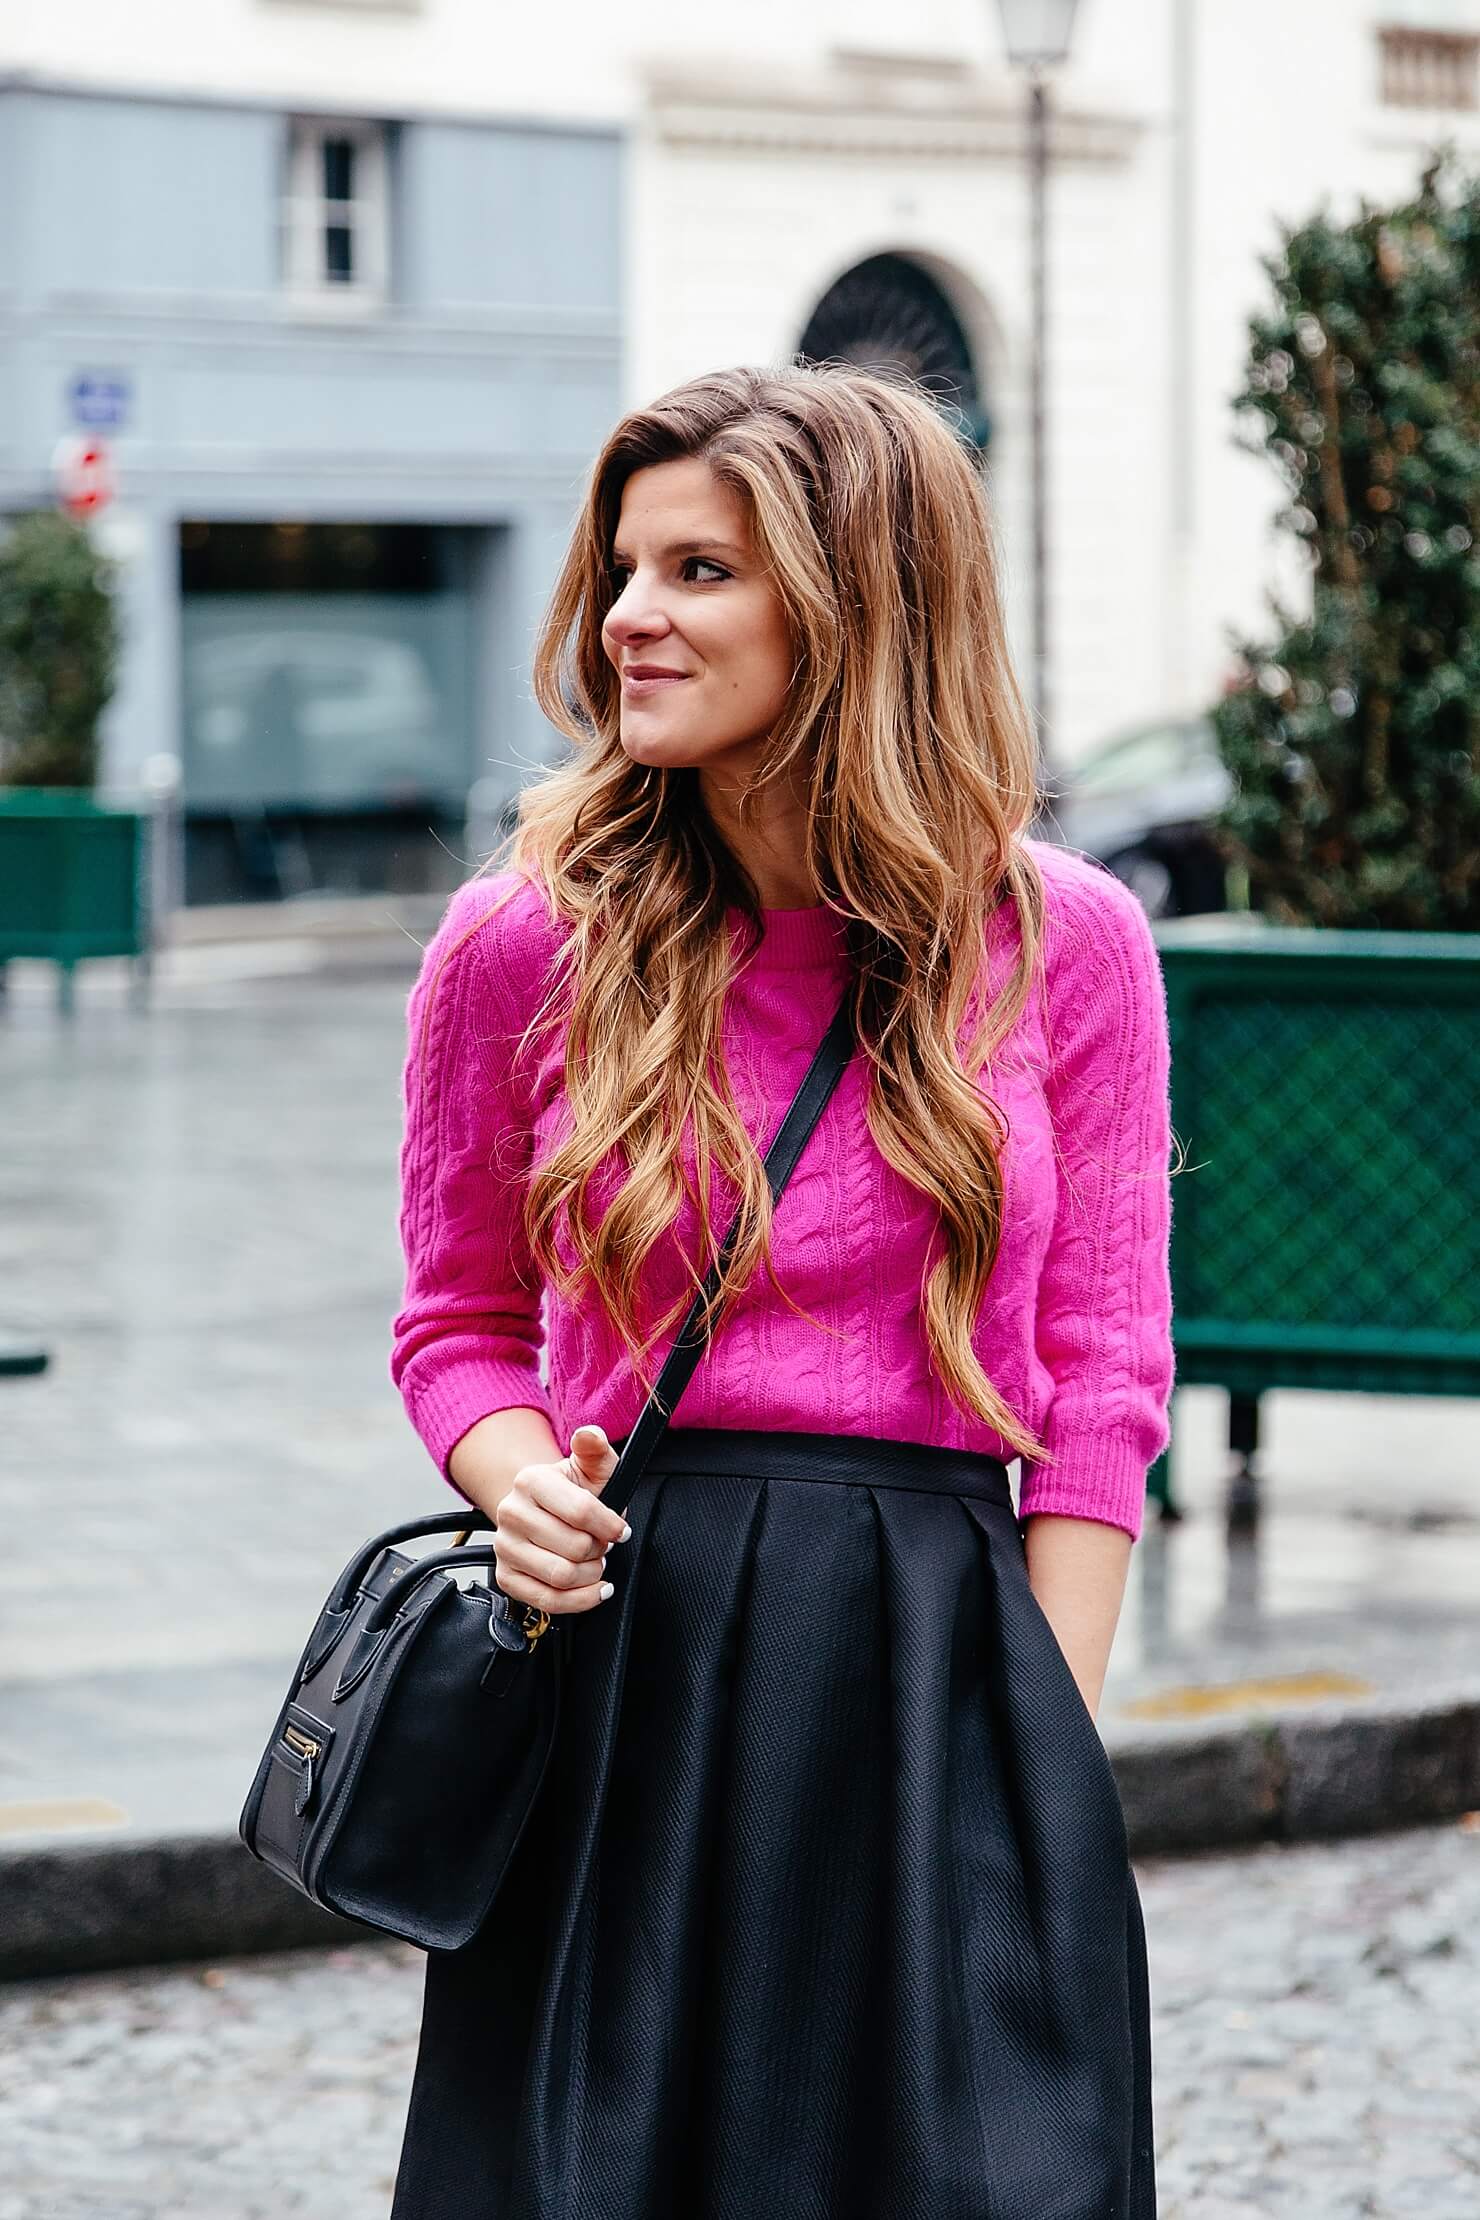 Black midi skirt, hot pink sweater, gucci loafers in Paris